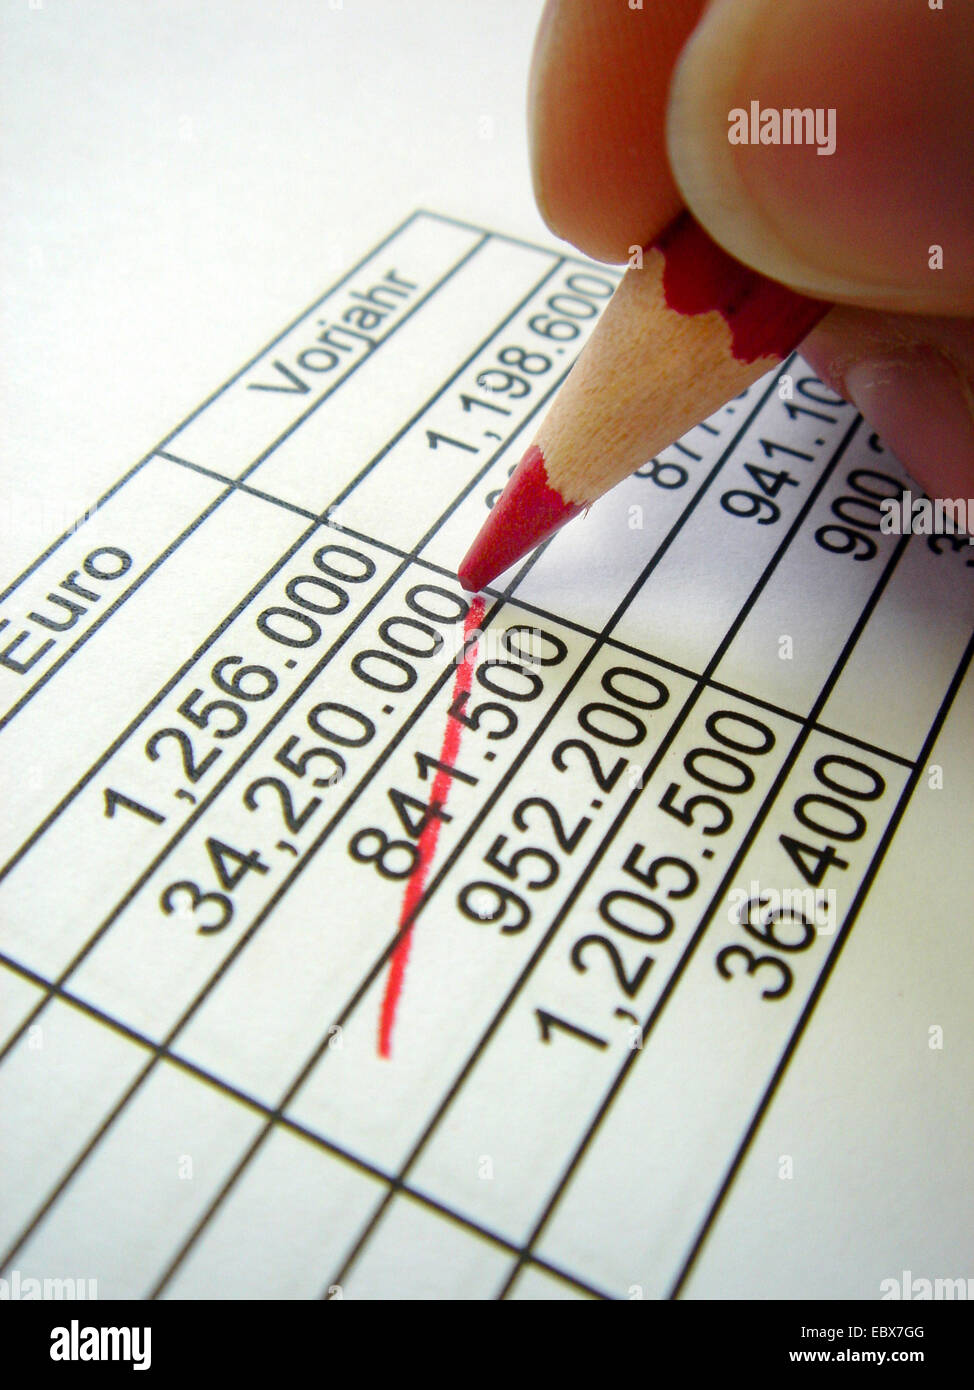 striking out a value on a balance sheet with a red pencil Stock Photo